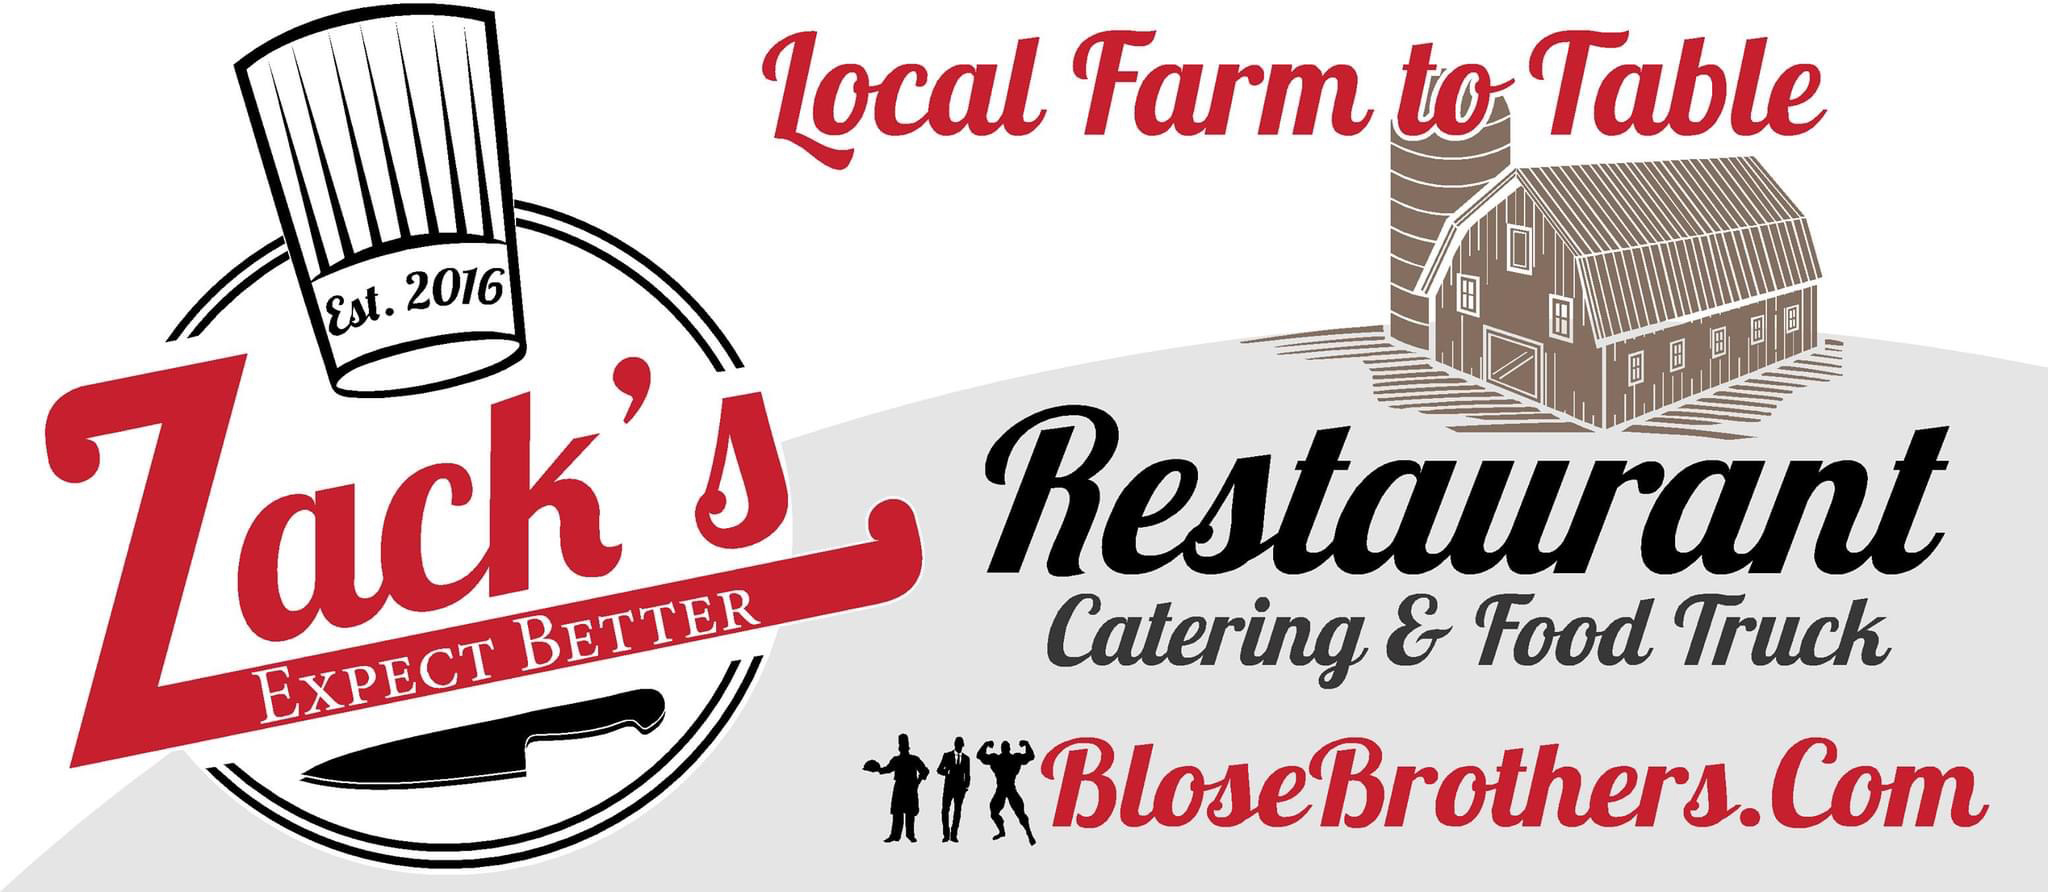 Zack's Local Farm to Table Restaurant & Catering